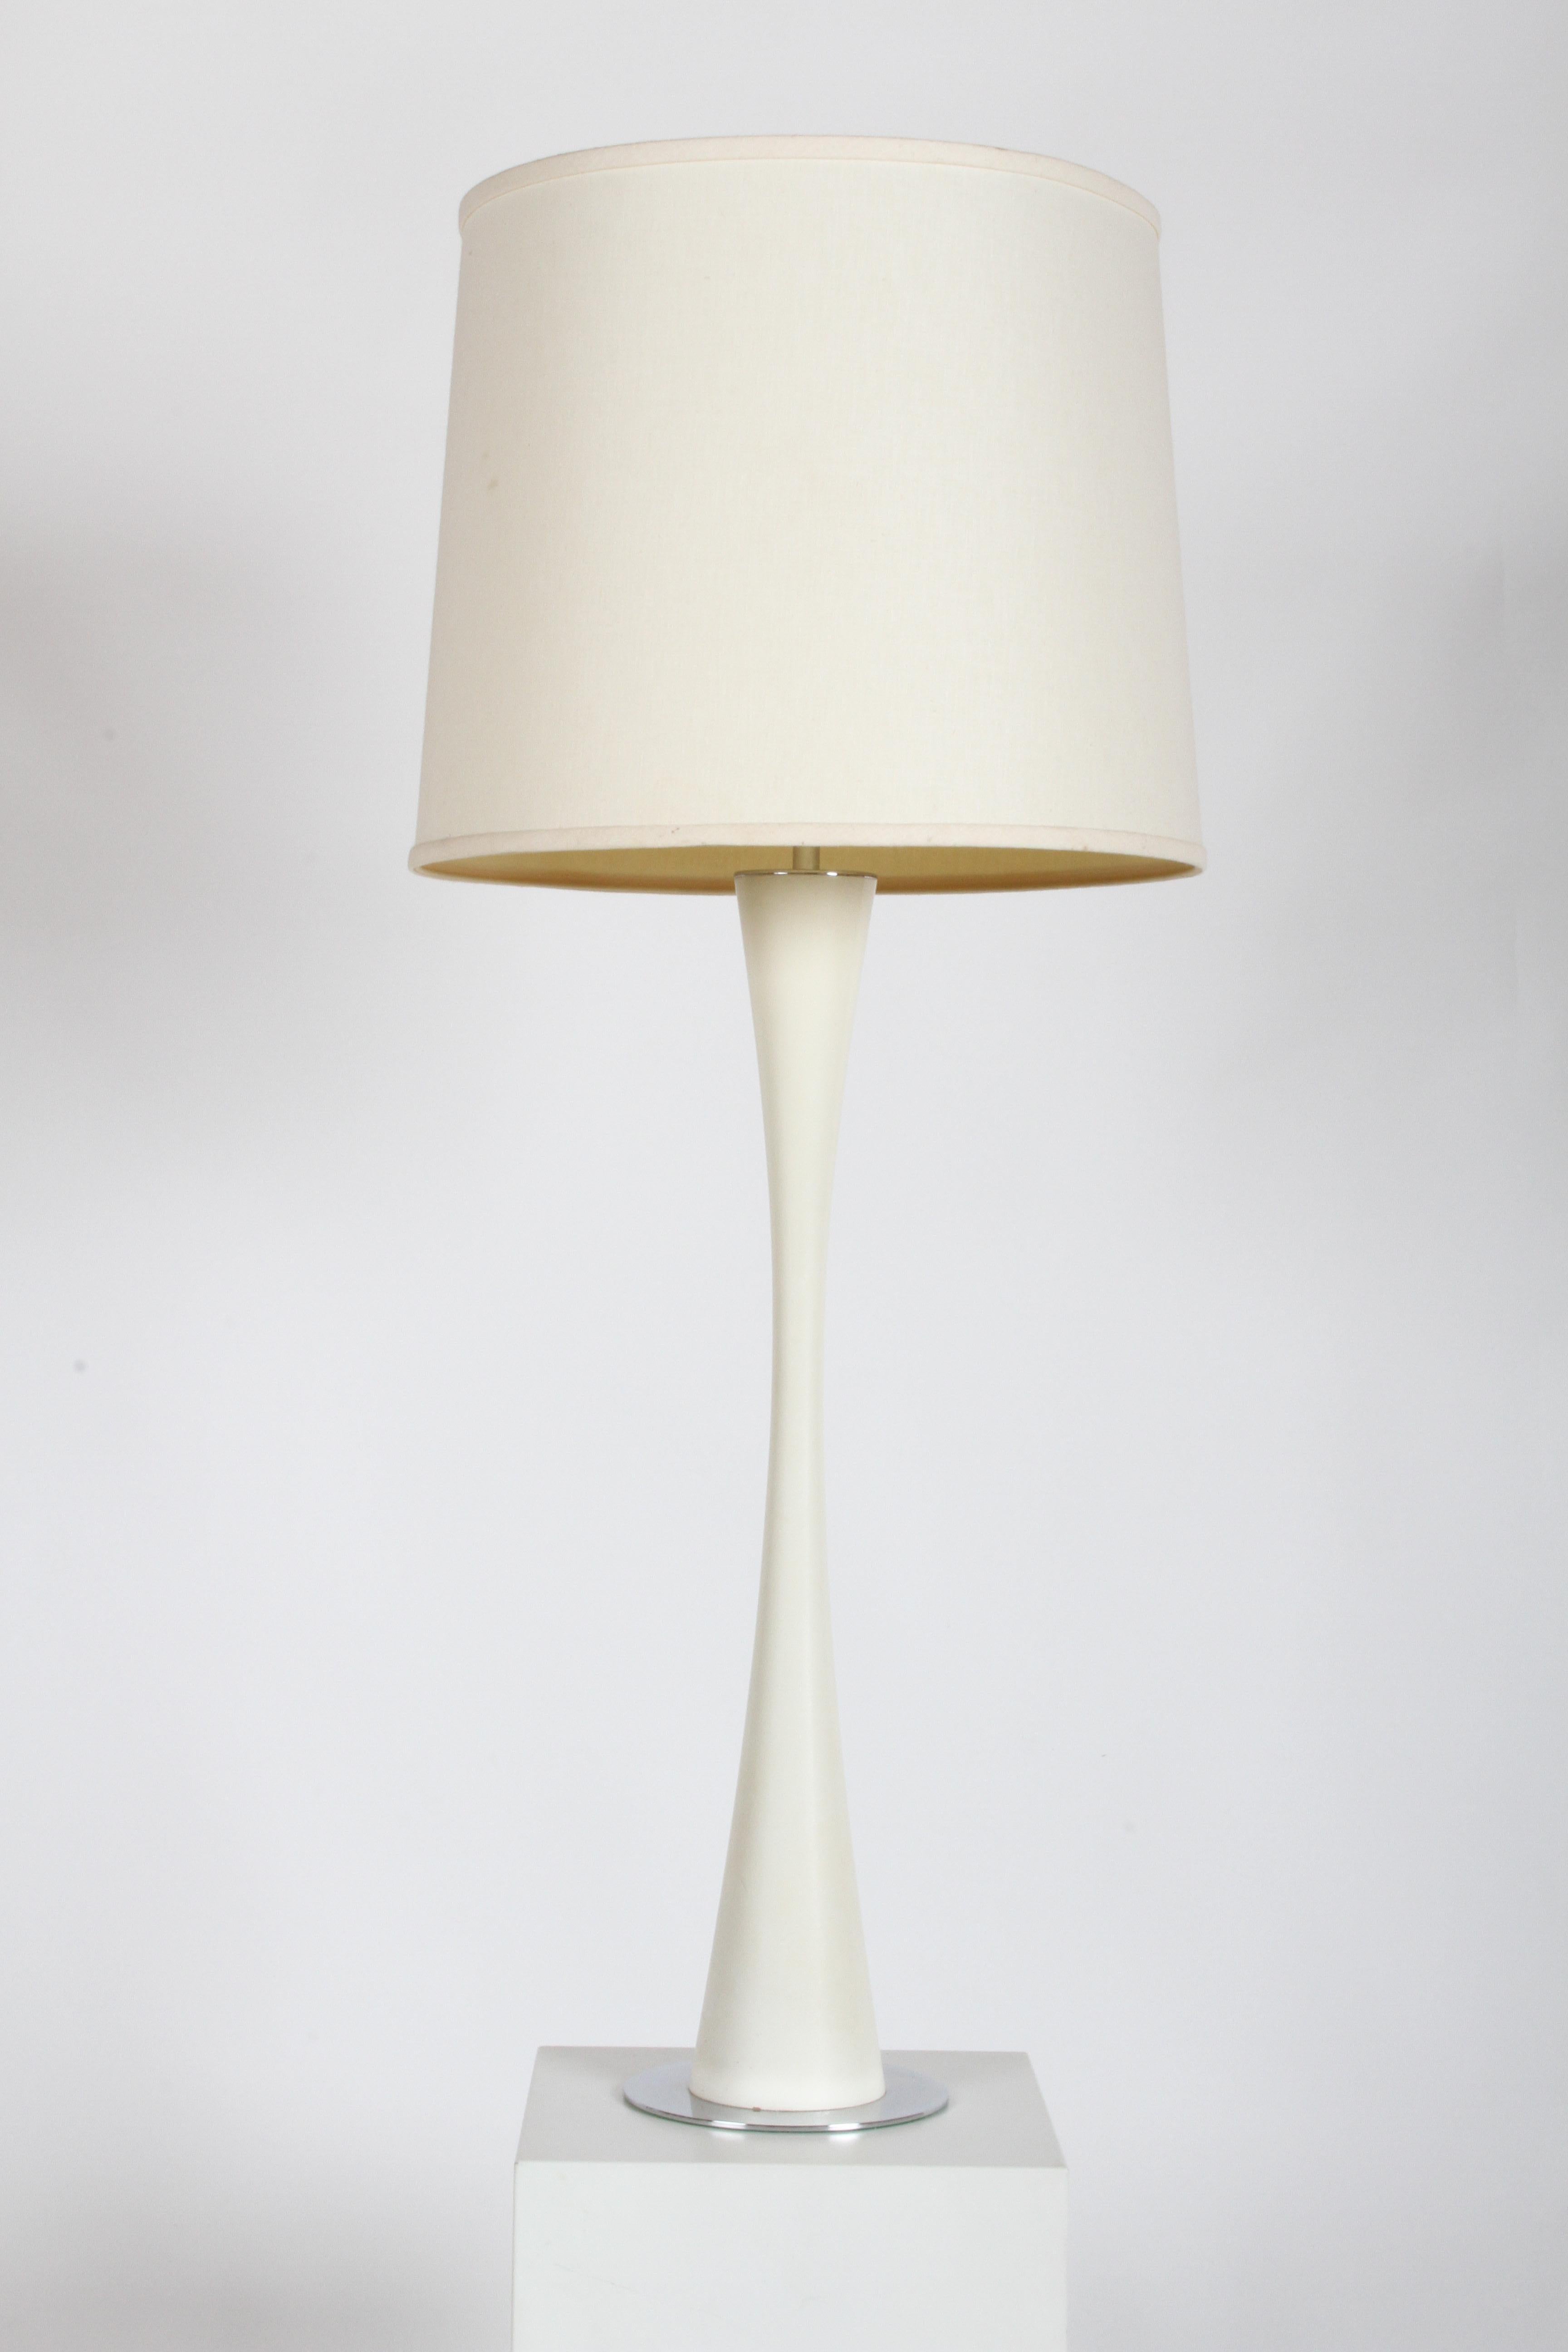 Modernist 1960s sleek white painted wood tall lamp with chrome base and 3 sockets. The lamps form reminds me of the Seattle space needle, or the shapes used Lagardo Tackett for Architectural pottery. Also in the style of Eero Saarinen's tulip tables